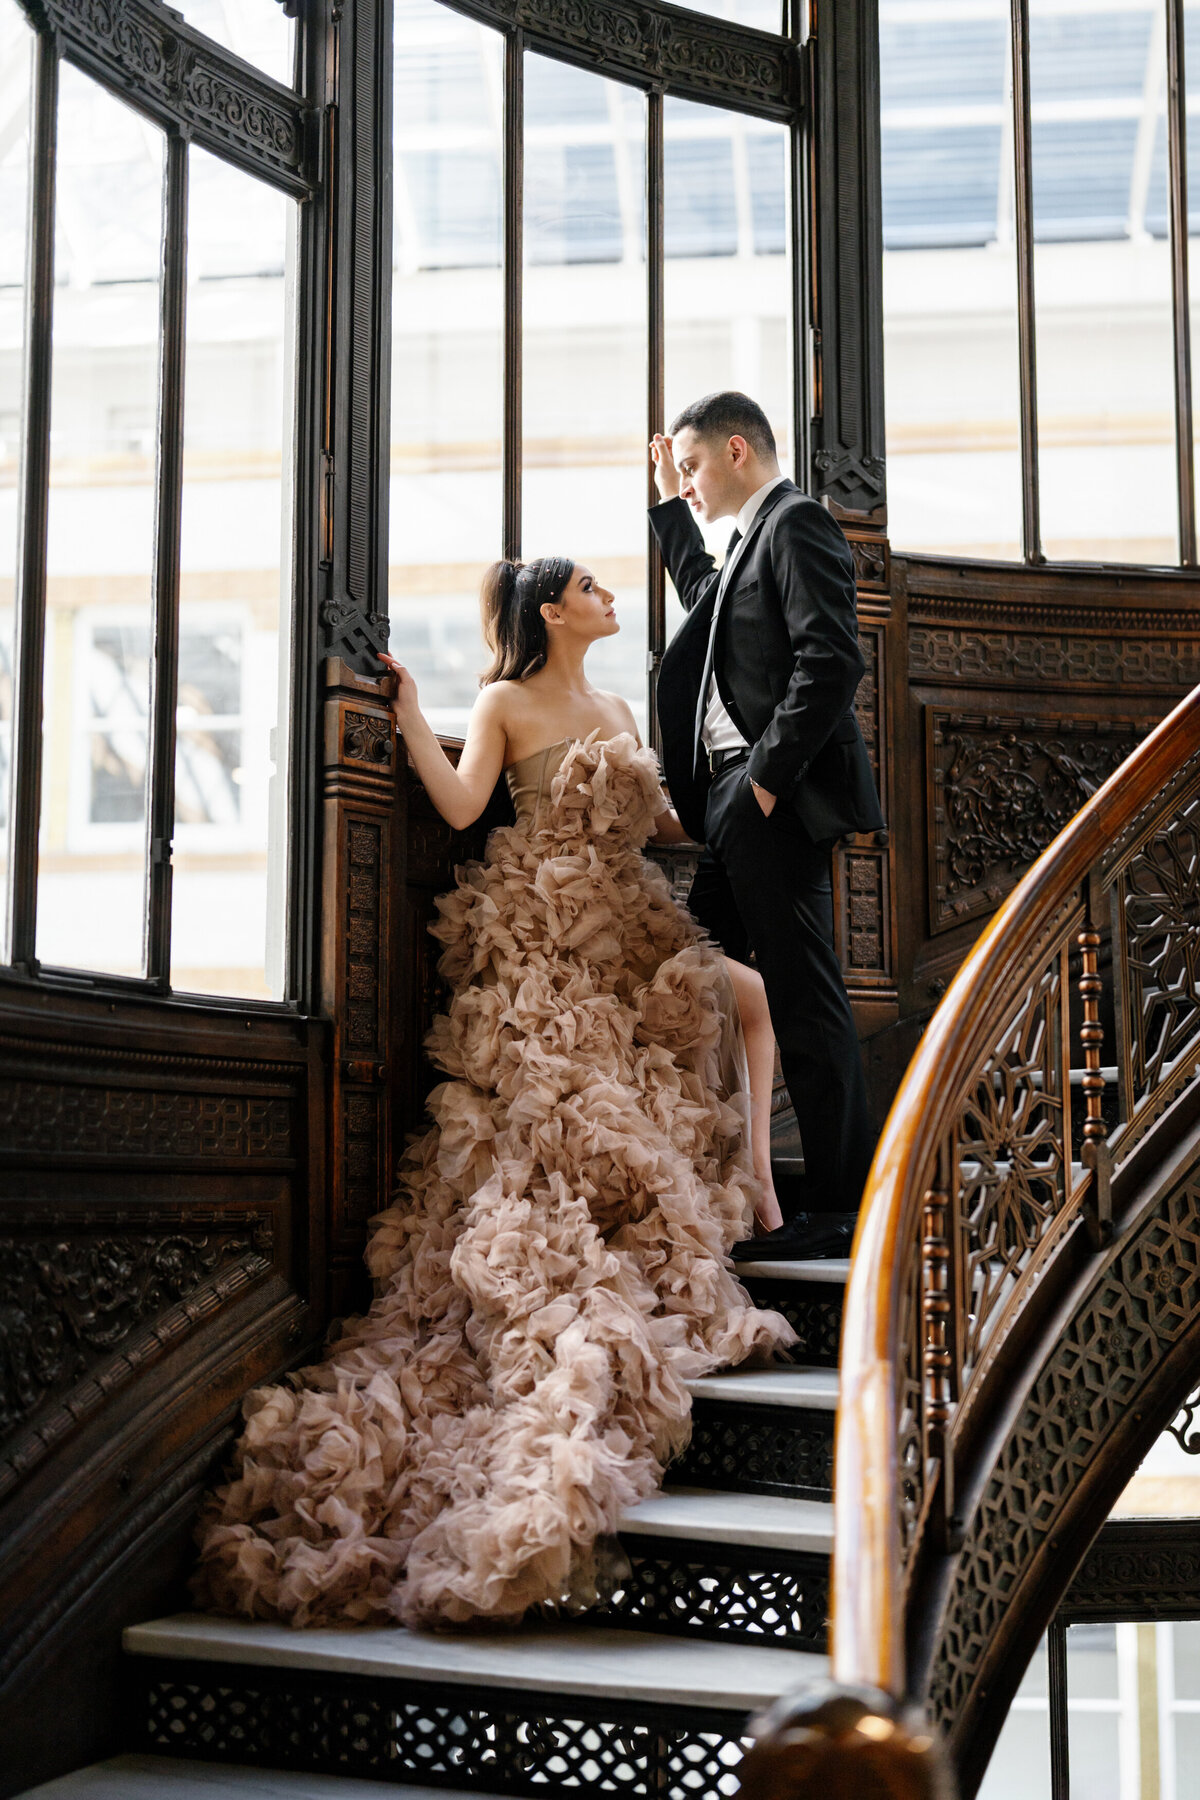 Aspen-Avenue-Chicago-Wedding-Photographer-Rookery-Engagement-Session-Histoircal-Stairs-Moody-Dramatic-Magazine-Unique-Gown-Stemming-From-Love-Emily-Rae-Bridal-Hair-FAV-13